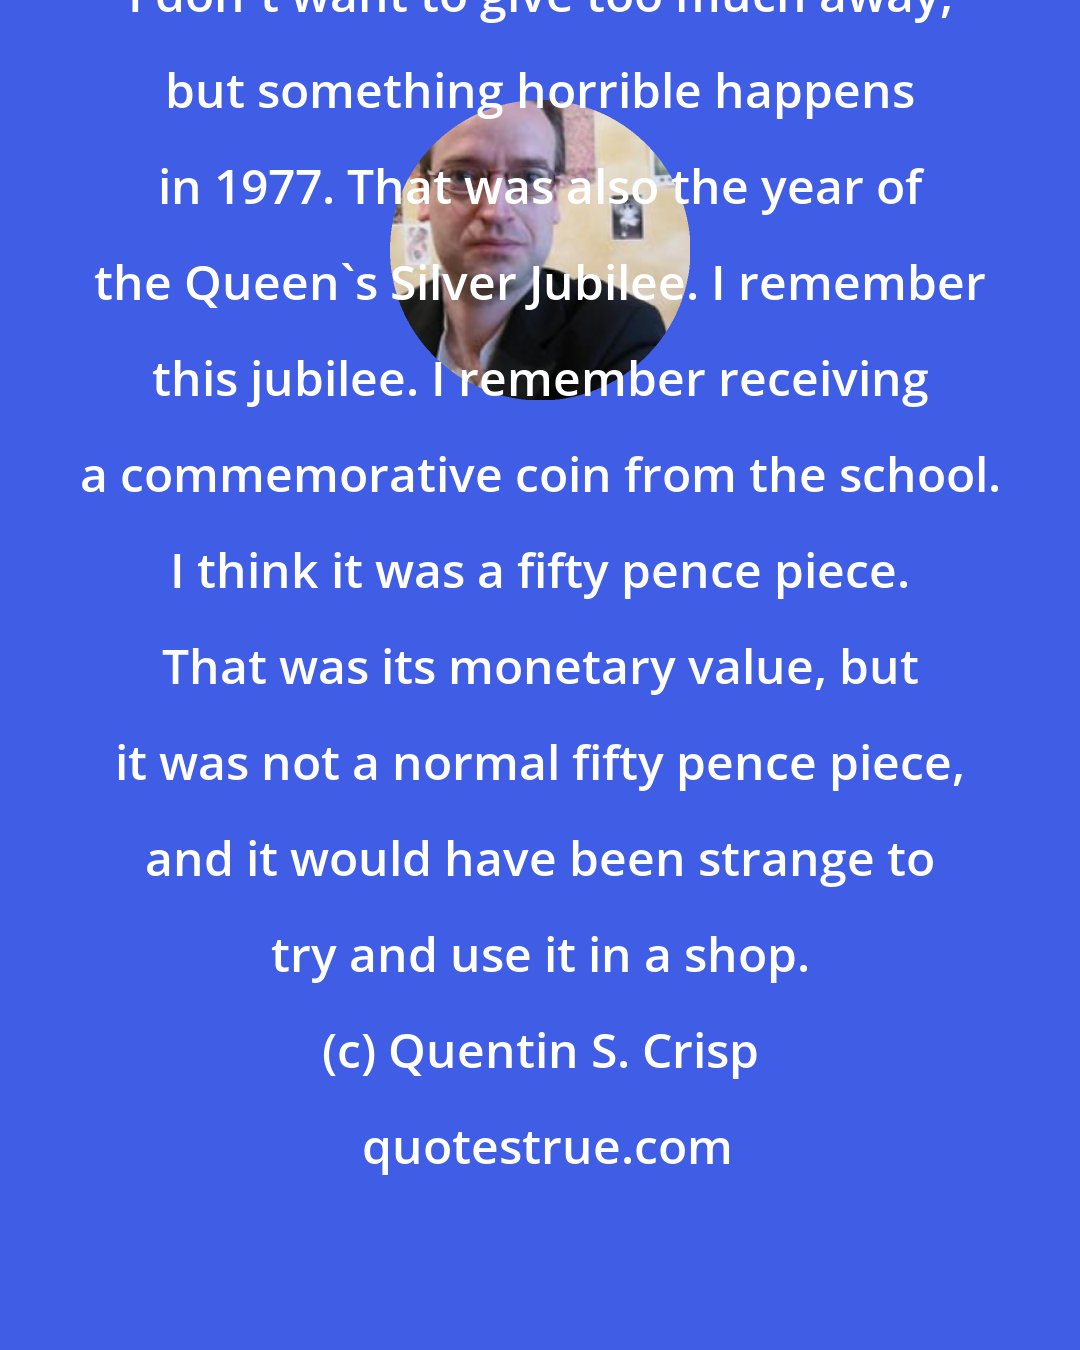 Quentin S. Crisp: I don't want to give too much away, but something horrible happens in 1977. That was also the year of the Queen's Silver Jubilee. I remember this jubilee. I remember receiving a commemorative coin from the school. I think it was a fifty pence piece. That was its monetary value, but it was not a normal fifty pence piece, and it would have been strange to try and use it in a shop.